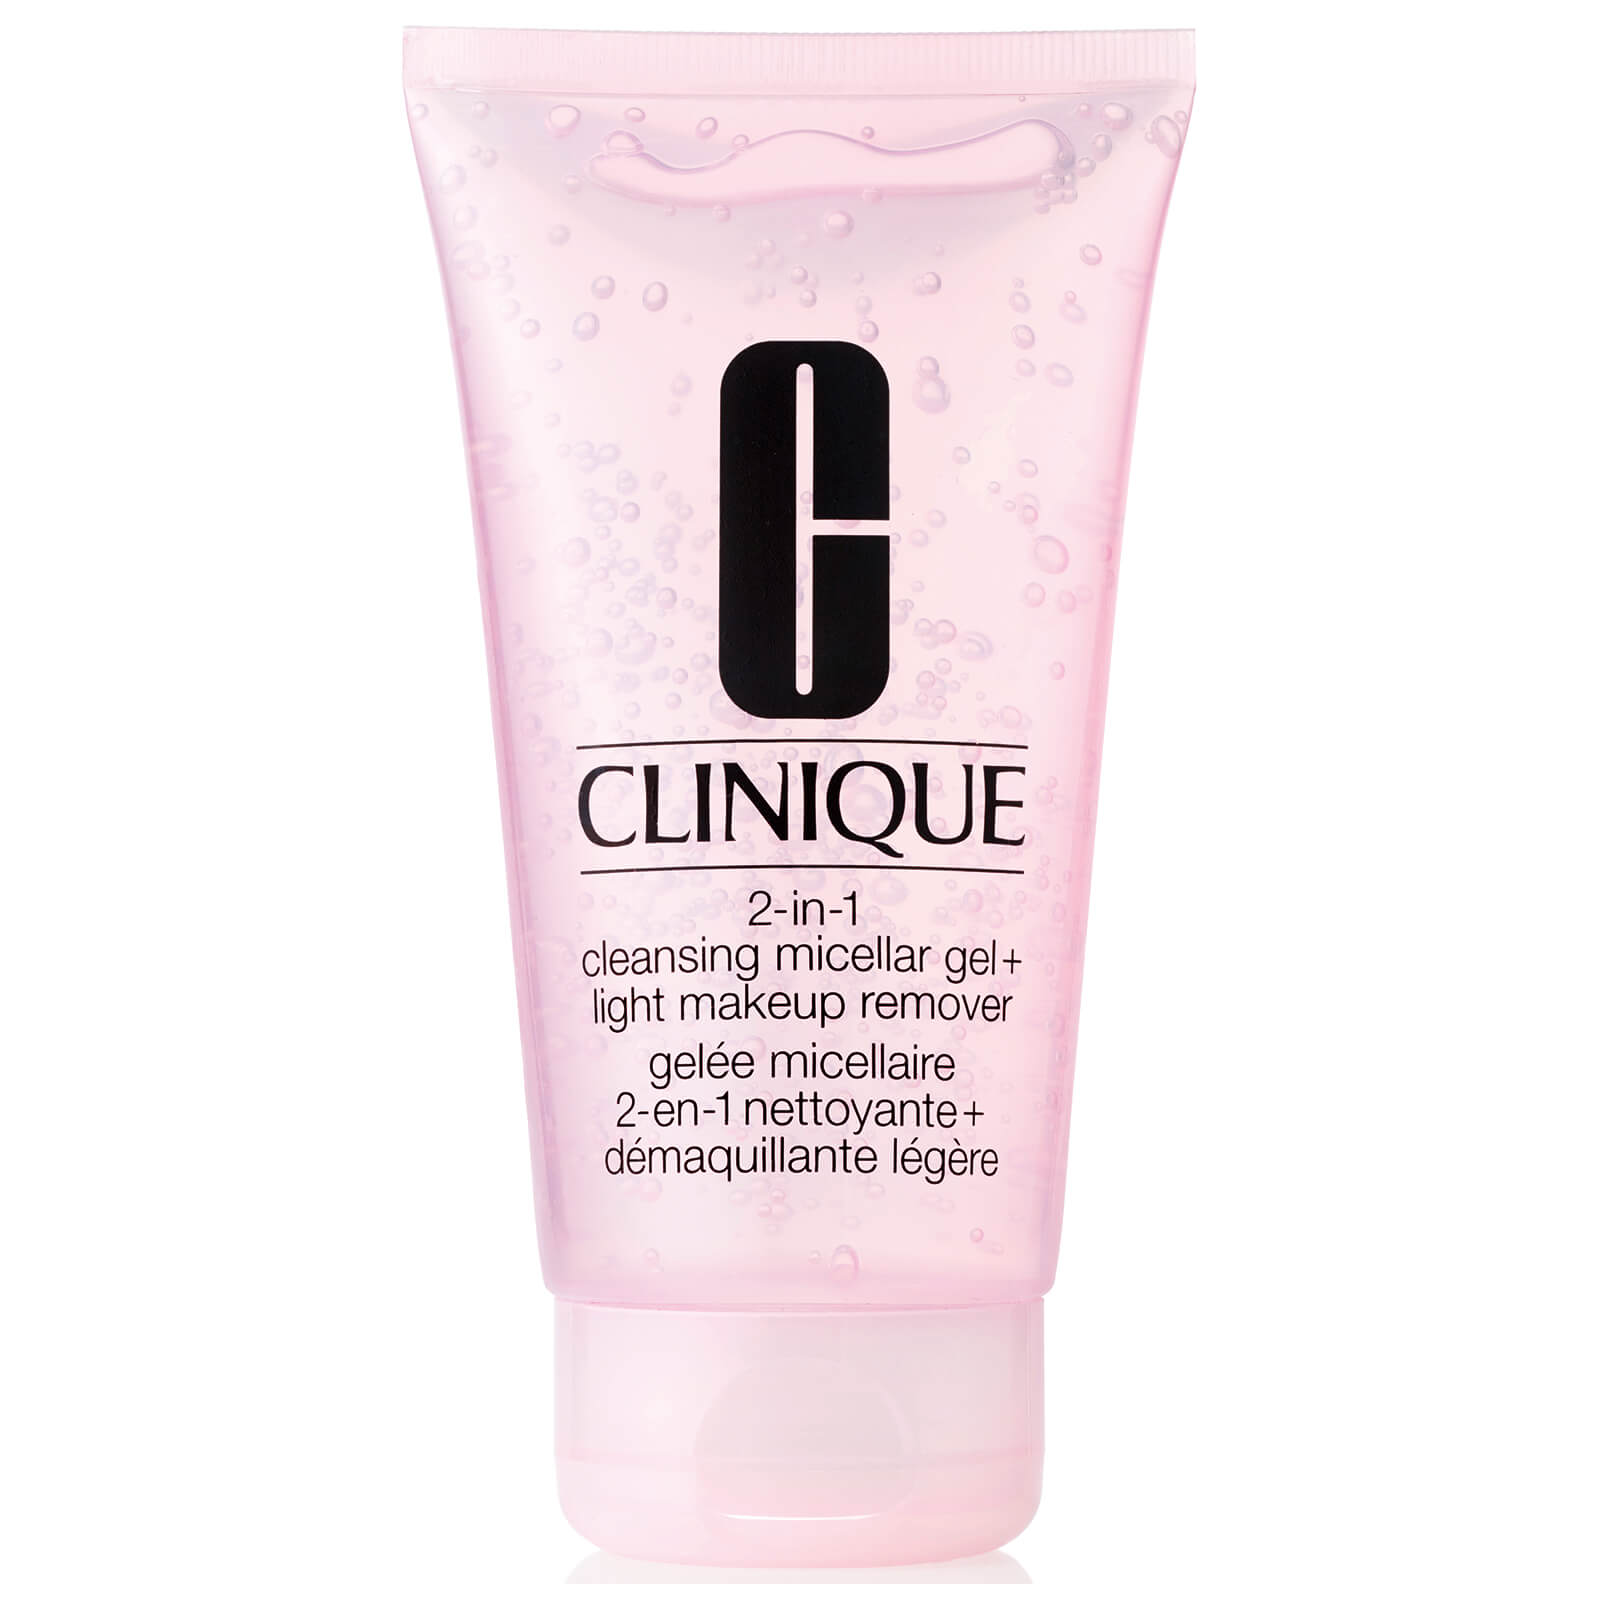 Clinique 2  in 1  Cleansing Micellar Gel Light Makeup  